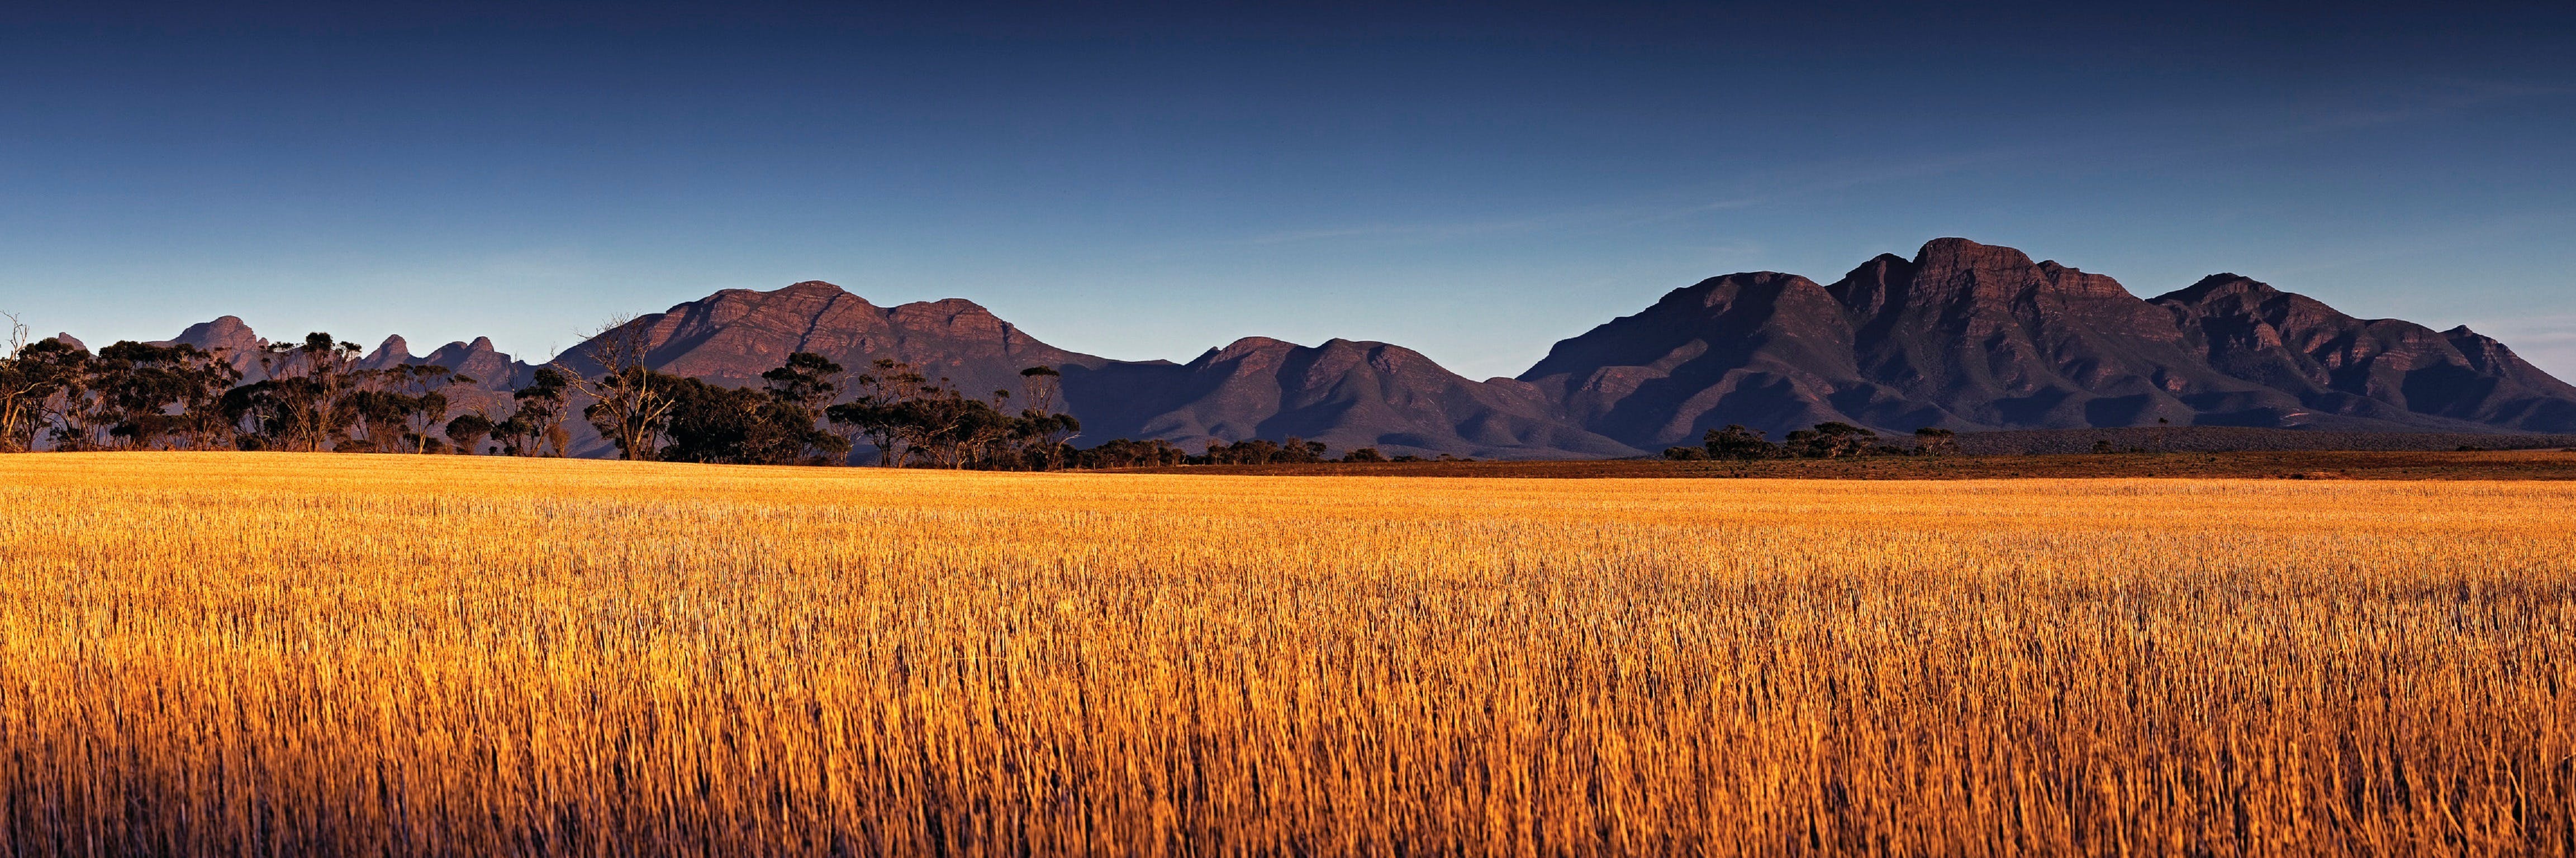 Southern Wonders Wildflower Trail - Accommodation Guide